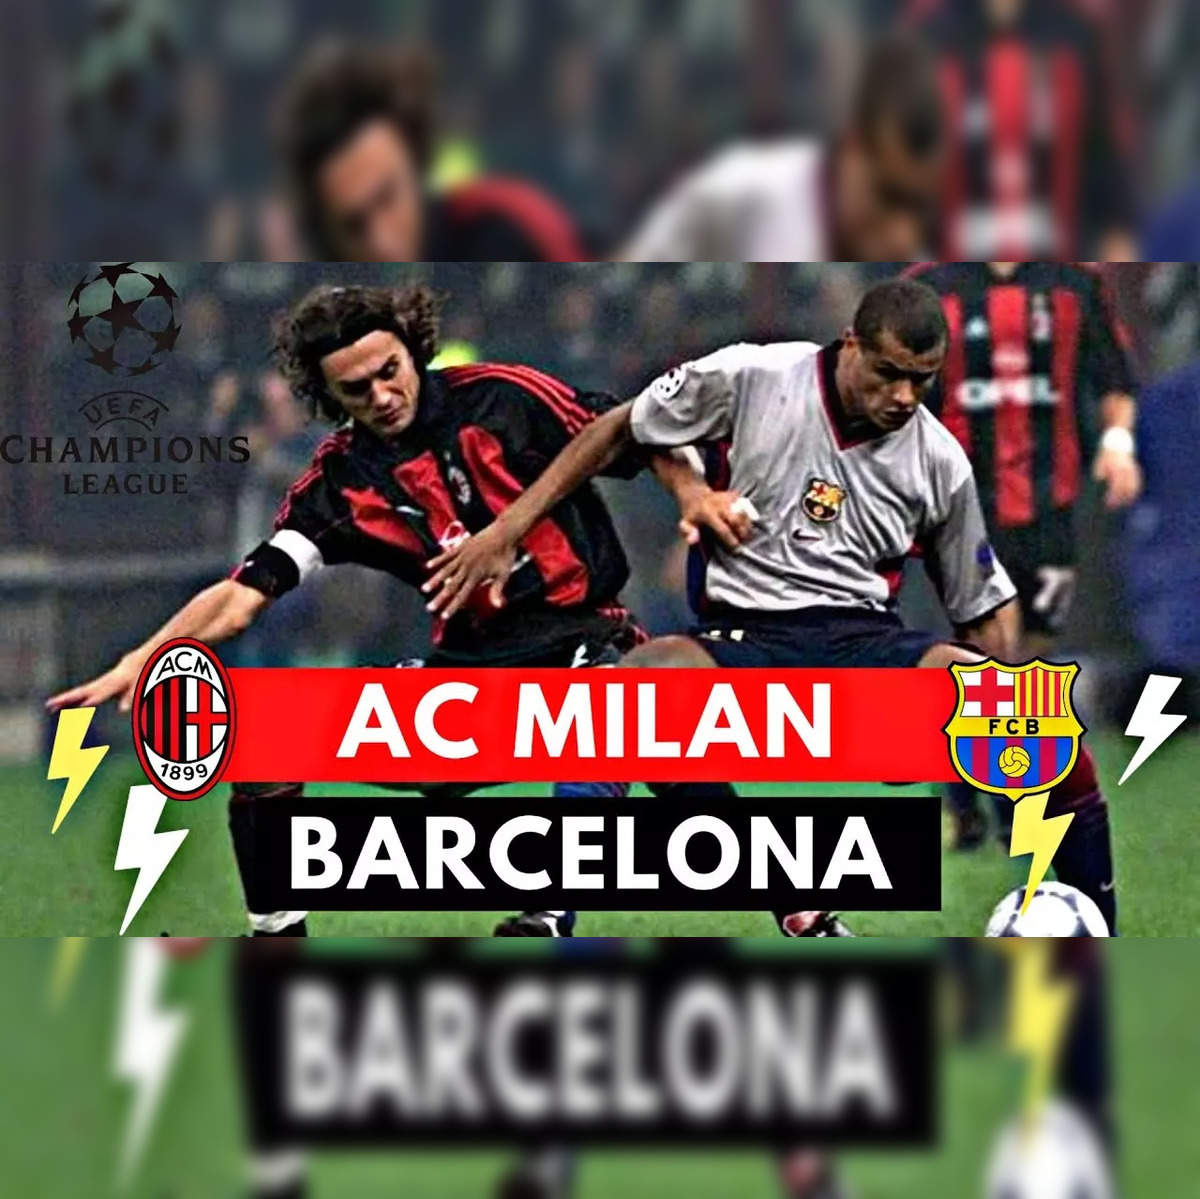 Barcelona vs AC Milan live Barcelona vs AC Milan live streaming Head-to-head, where to watch soccer game in US